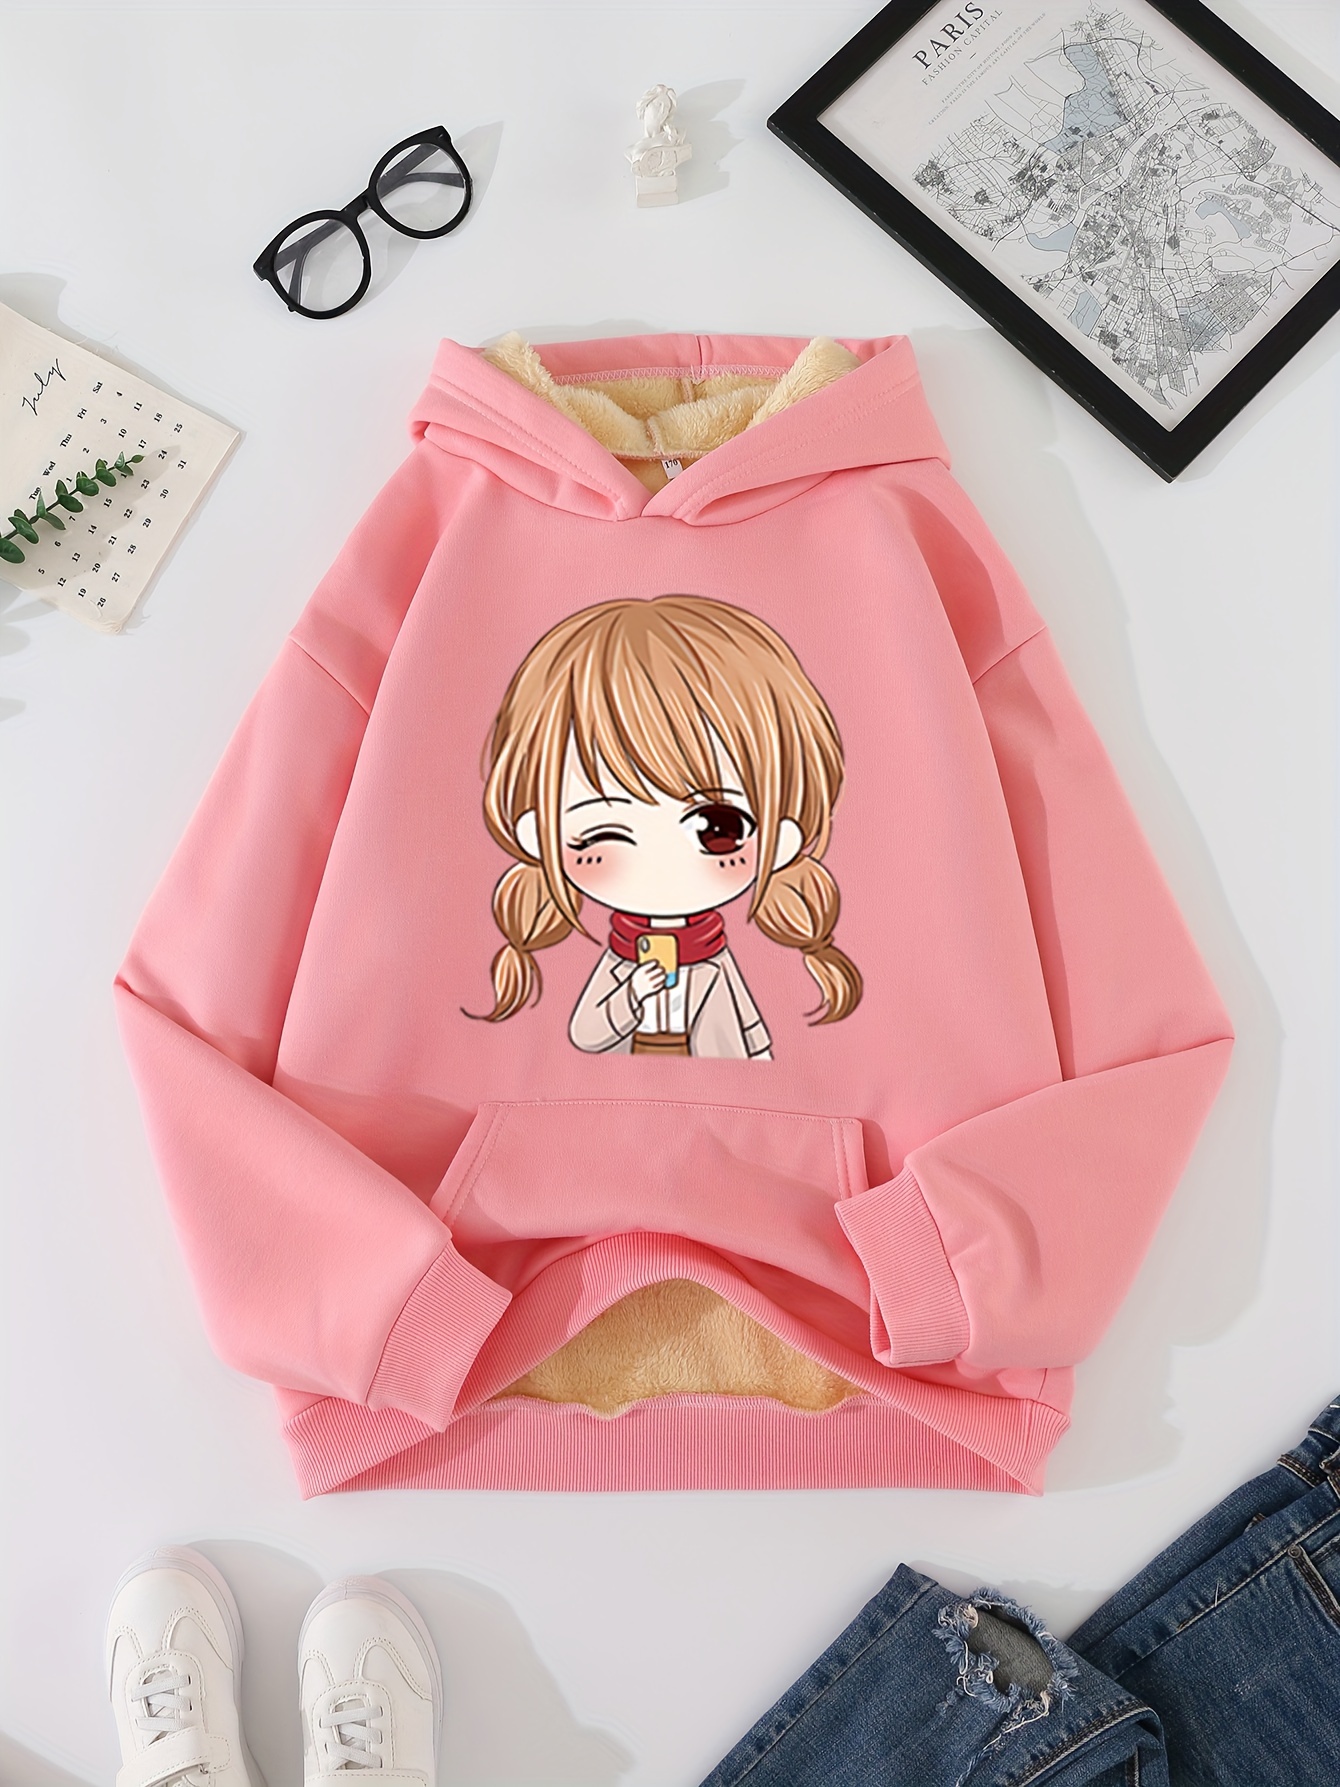 Cute Hoodies: Pullover Sweatshirts Fit for Spring and Winter